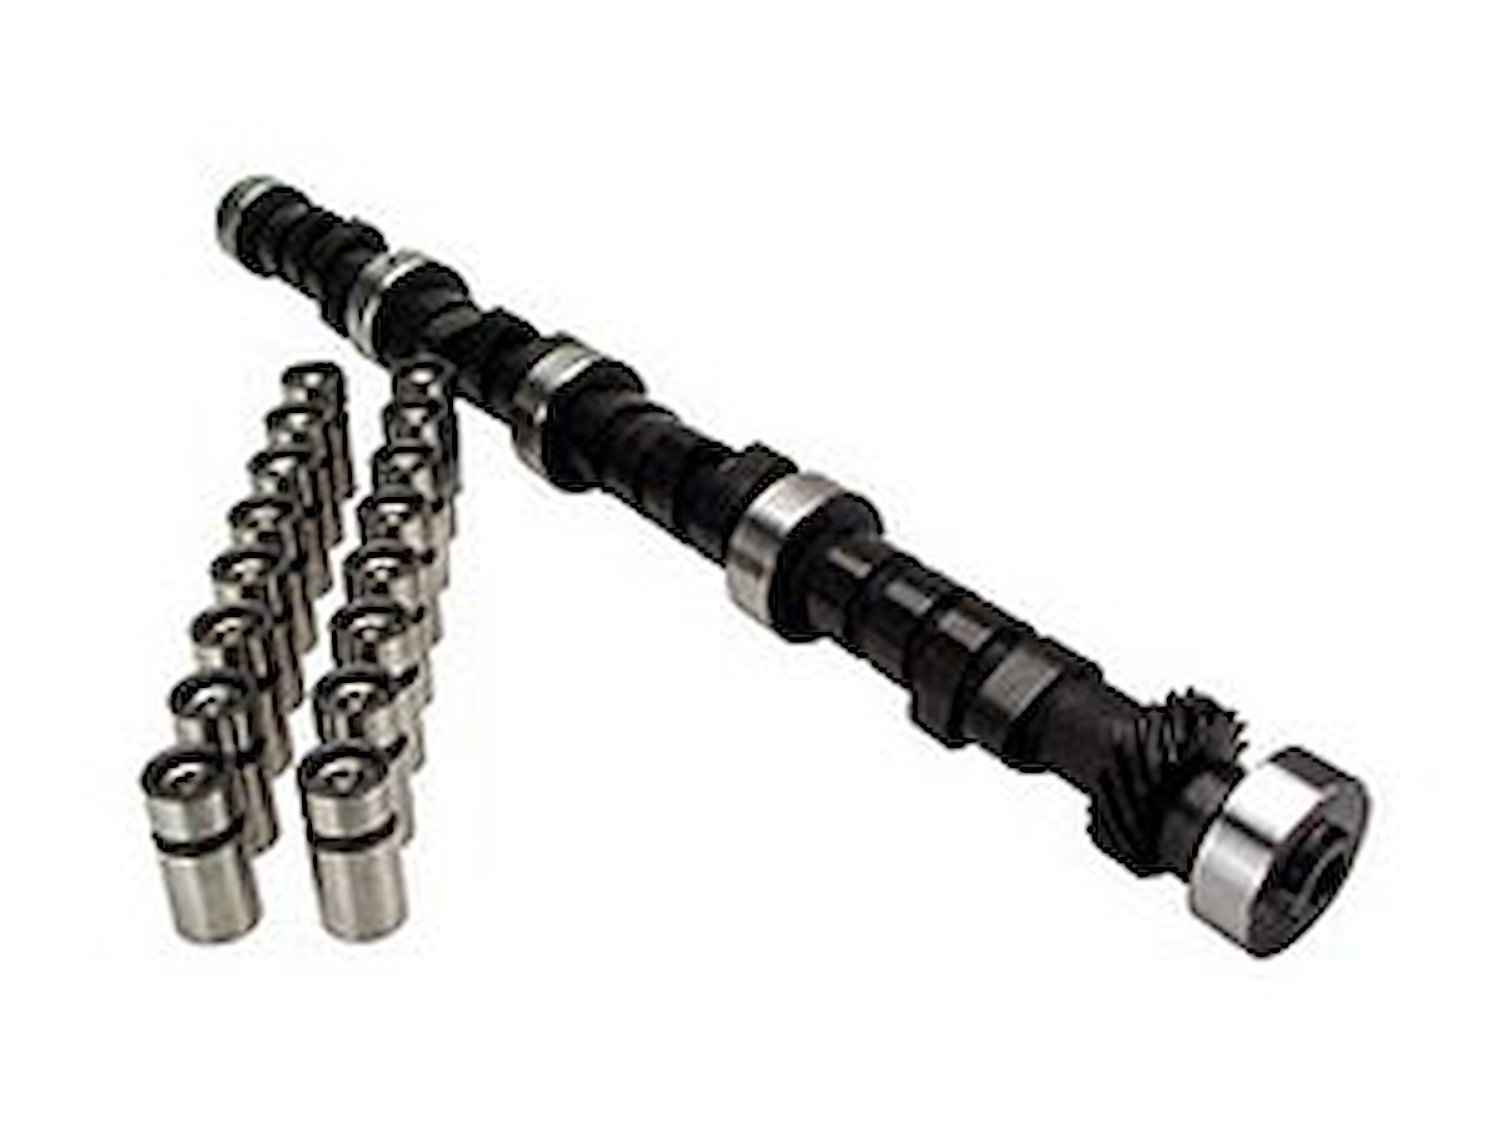 Xtreme Energy 256H Hydraulic Flat Tappet Camshaft & Lifter Kit Lift .447"/.455" Duration 256°/268° RPM Range 1000-5200